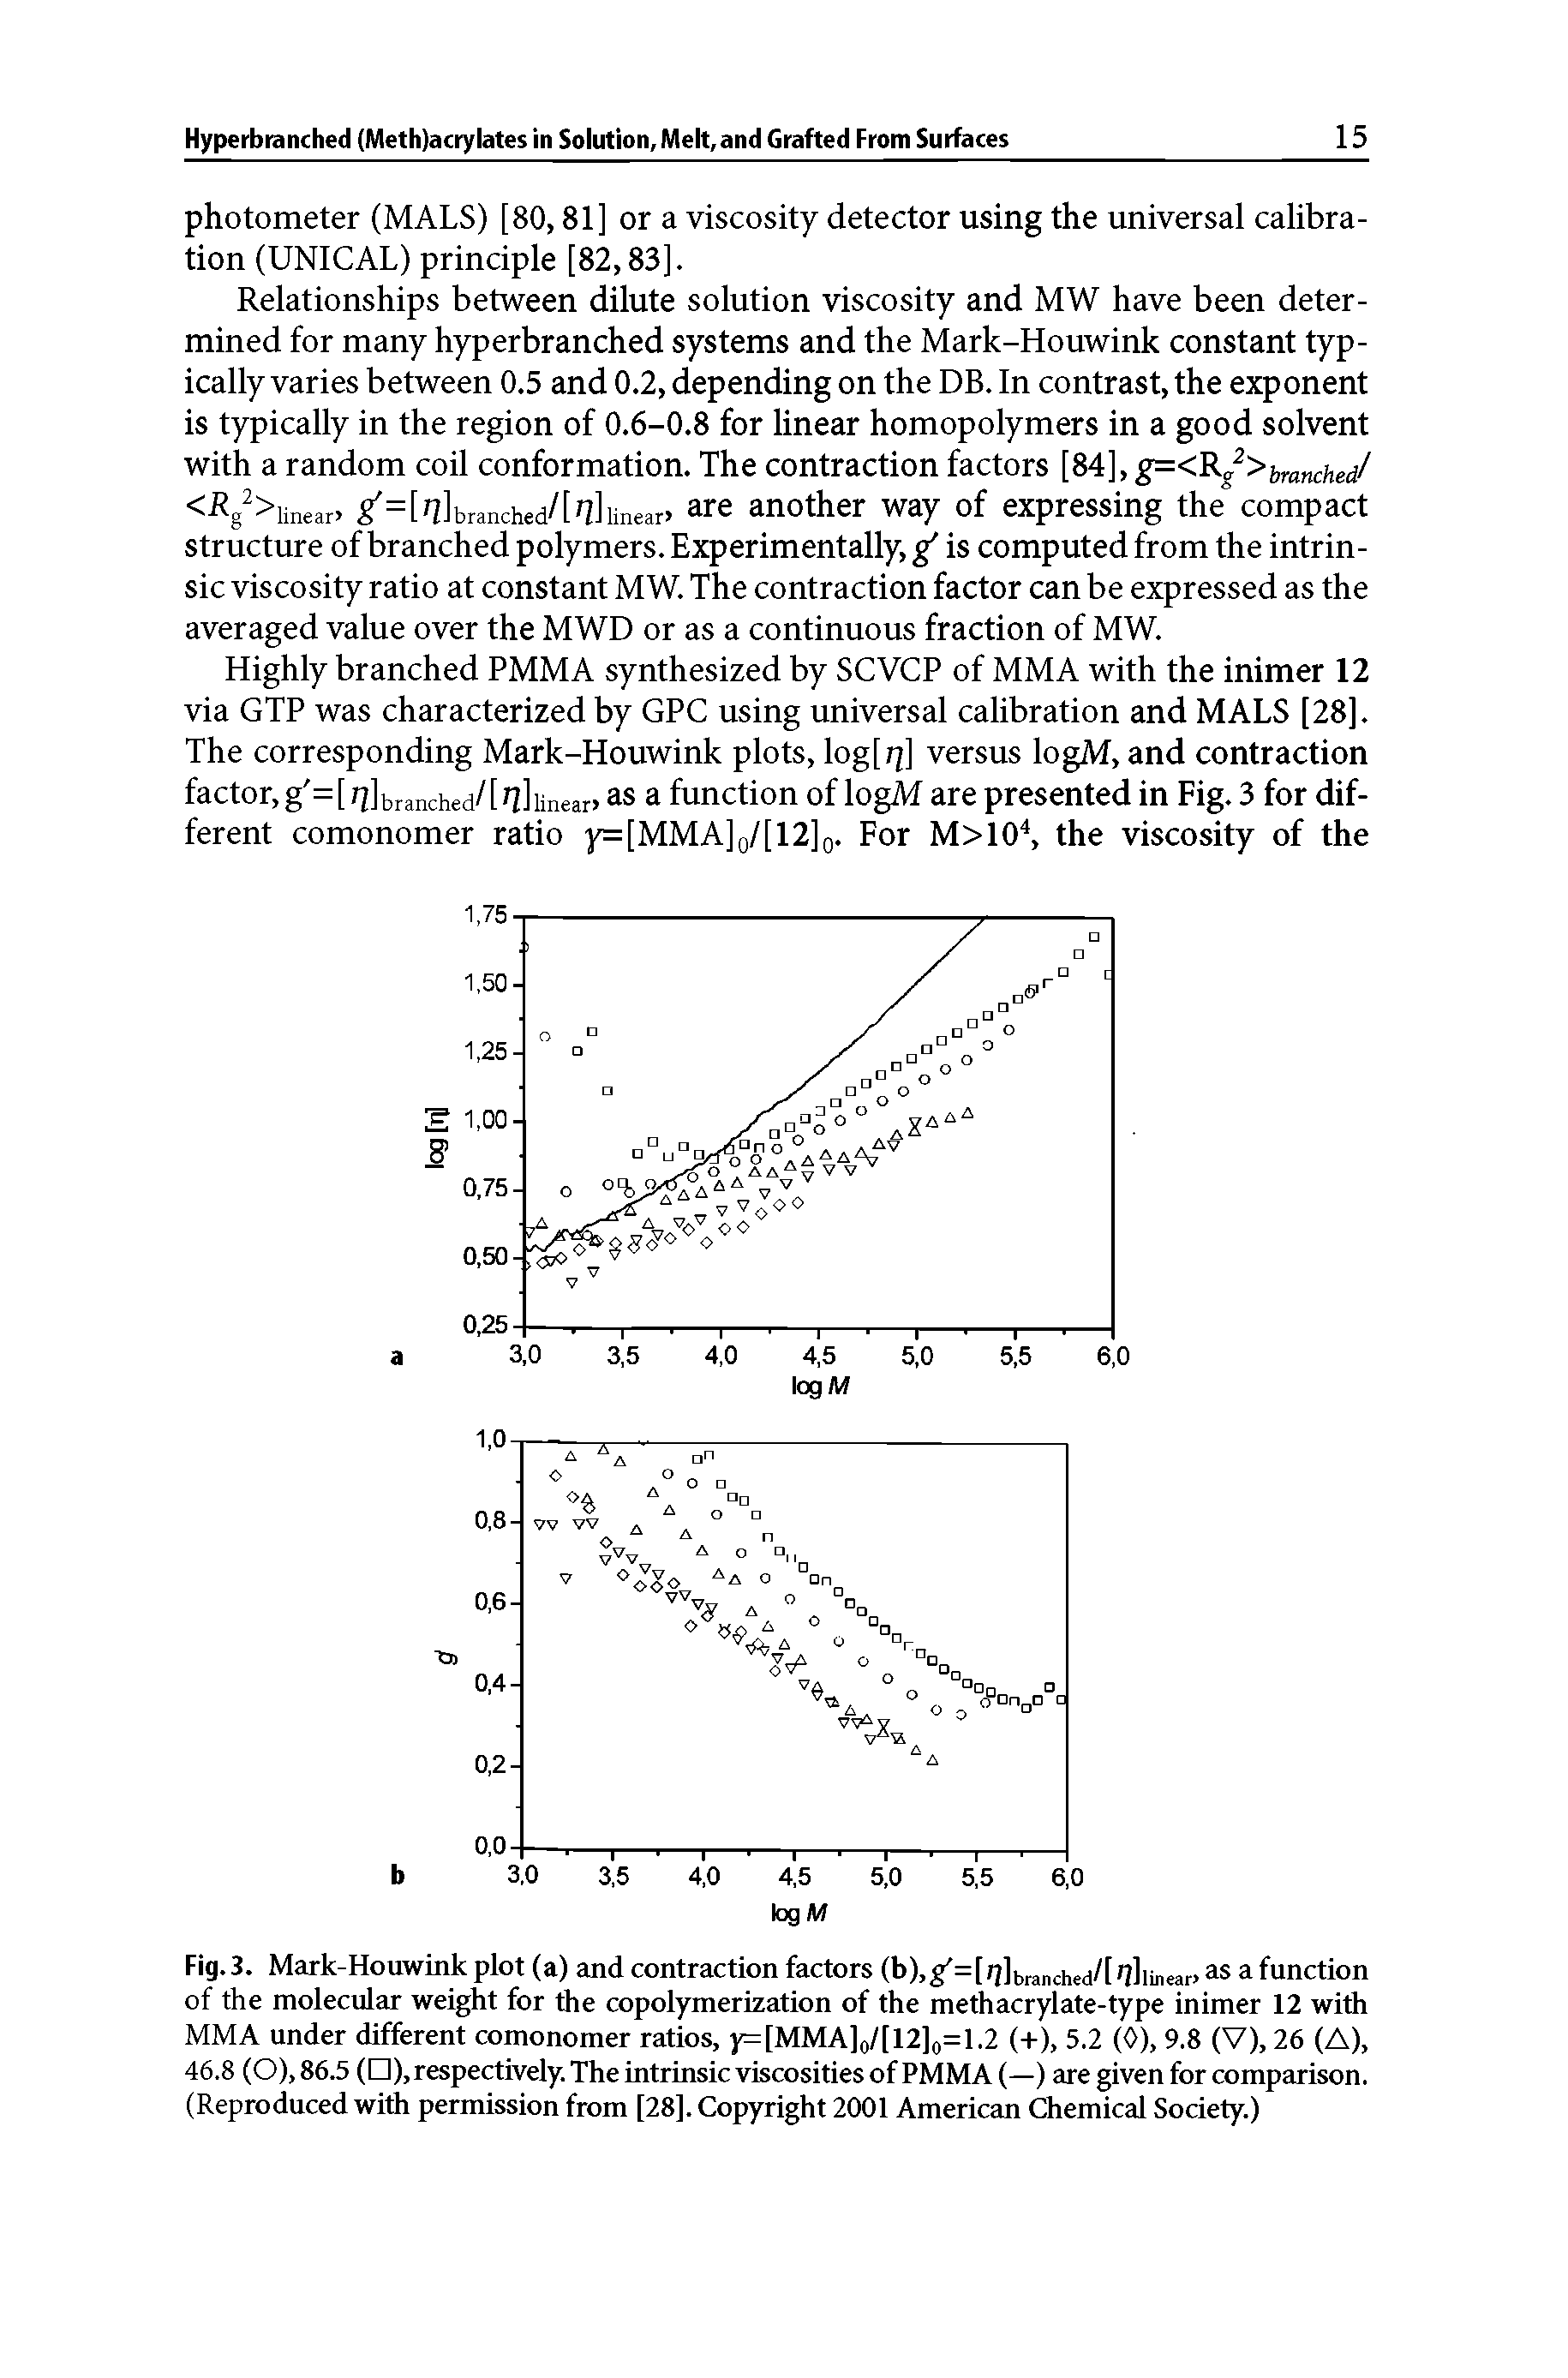 Fig. 3. Mark-Houwink plot (a) and contraction factors (b),g =[ j]b,a ched/[ lliineaD as a function of the molecular weight for the copolymerization of the methacrylate-type inimer 12 with MMA under different comonomer ratios, y=[MMA]o/[12](,=1.2 (+), 5.2 (0), 9.8 (V), 26 (A), 46.8 (0),86.5 ( ),respectively.TheintrinsicviscositiesofPMMA(—) are given for comparison. (Reproduced with permission from [28]. Copyright 2001 American Chemical Society.)...